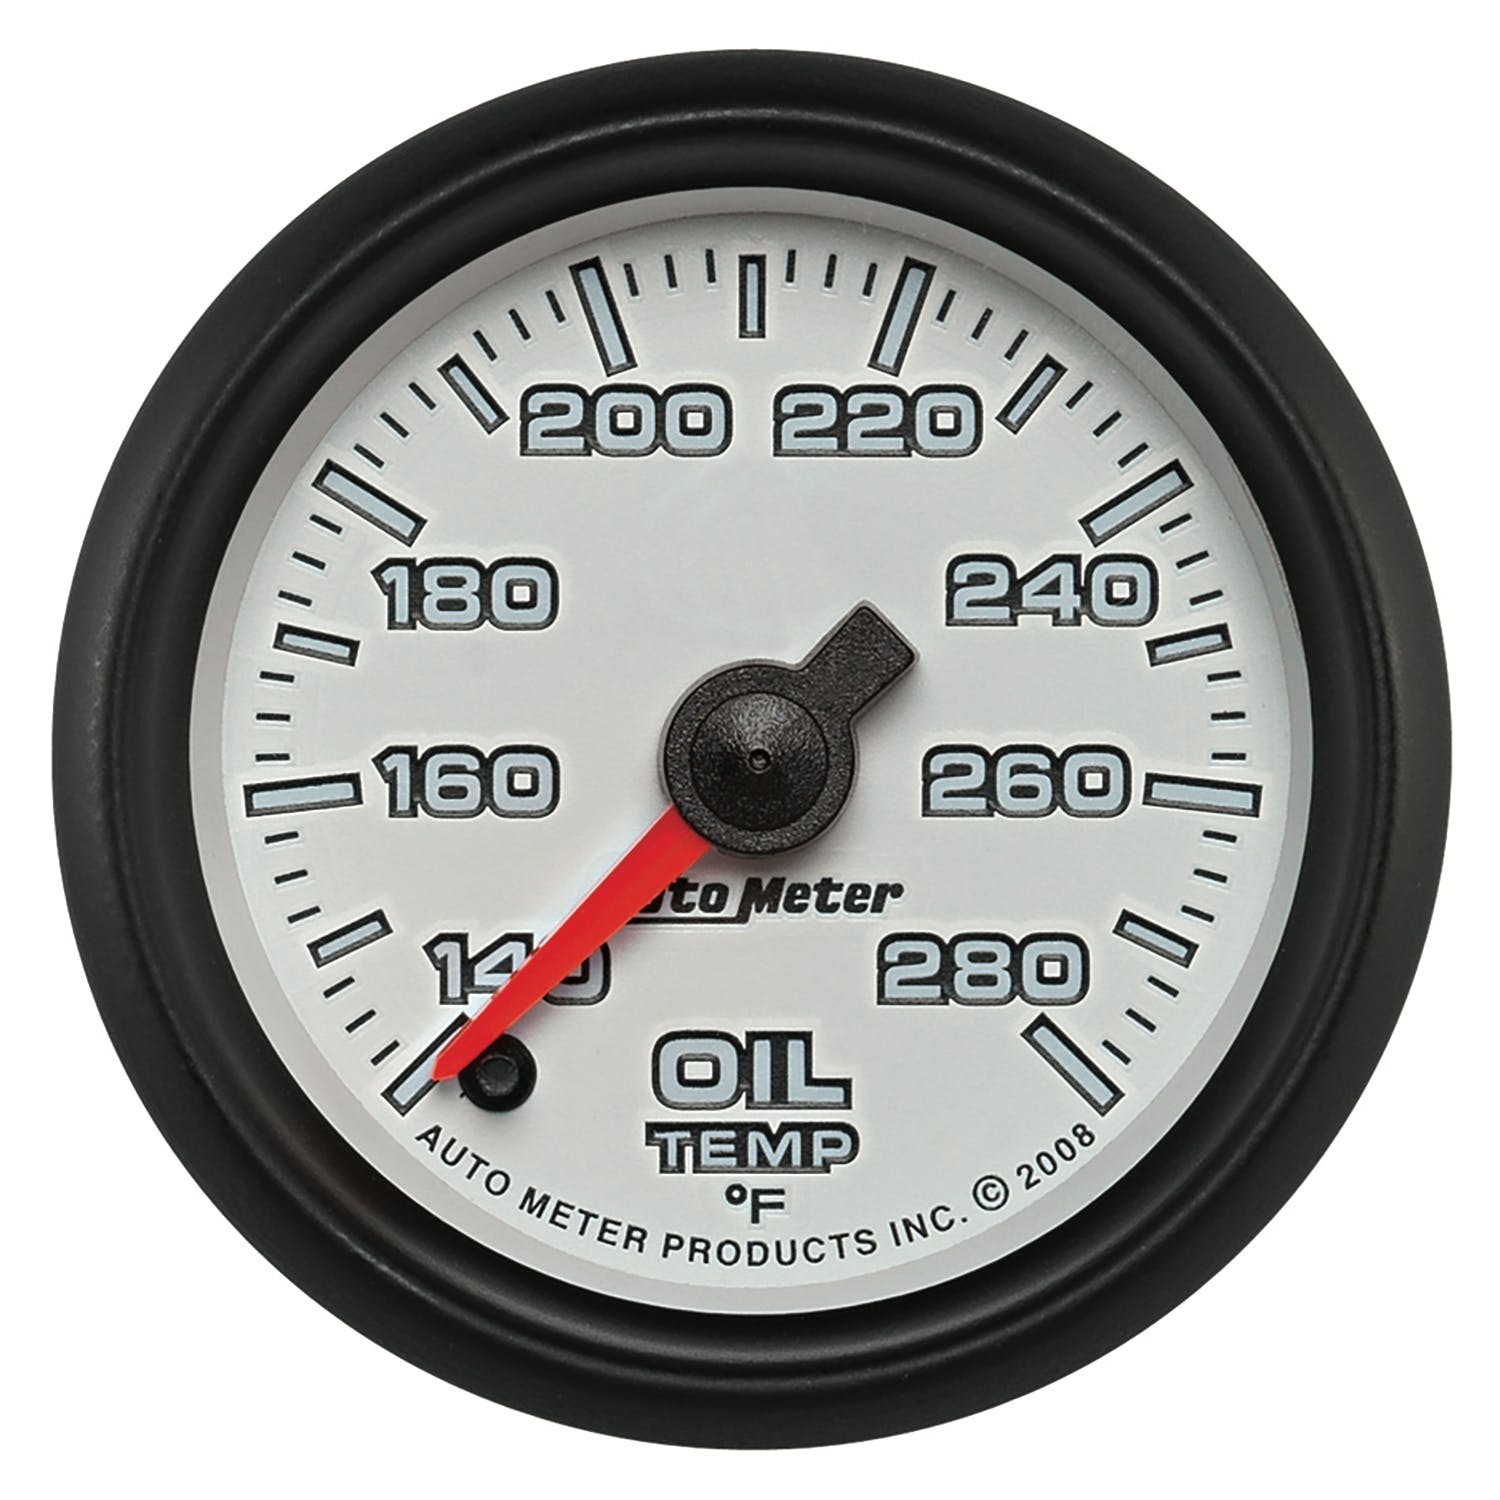 AutoMeter Products 19540 Oil Temperature Gauge, White-Pro Cycle 2-1/16 inch 140-280 degrees